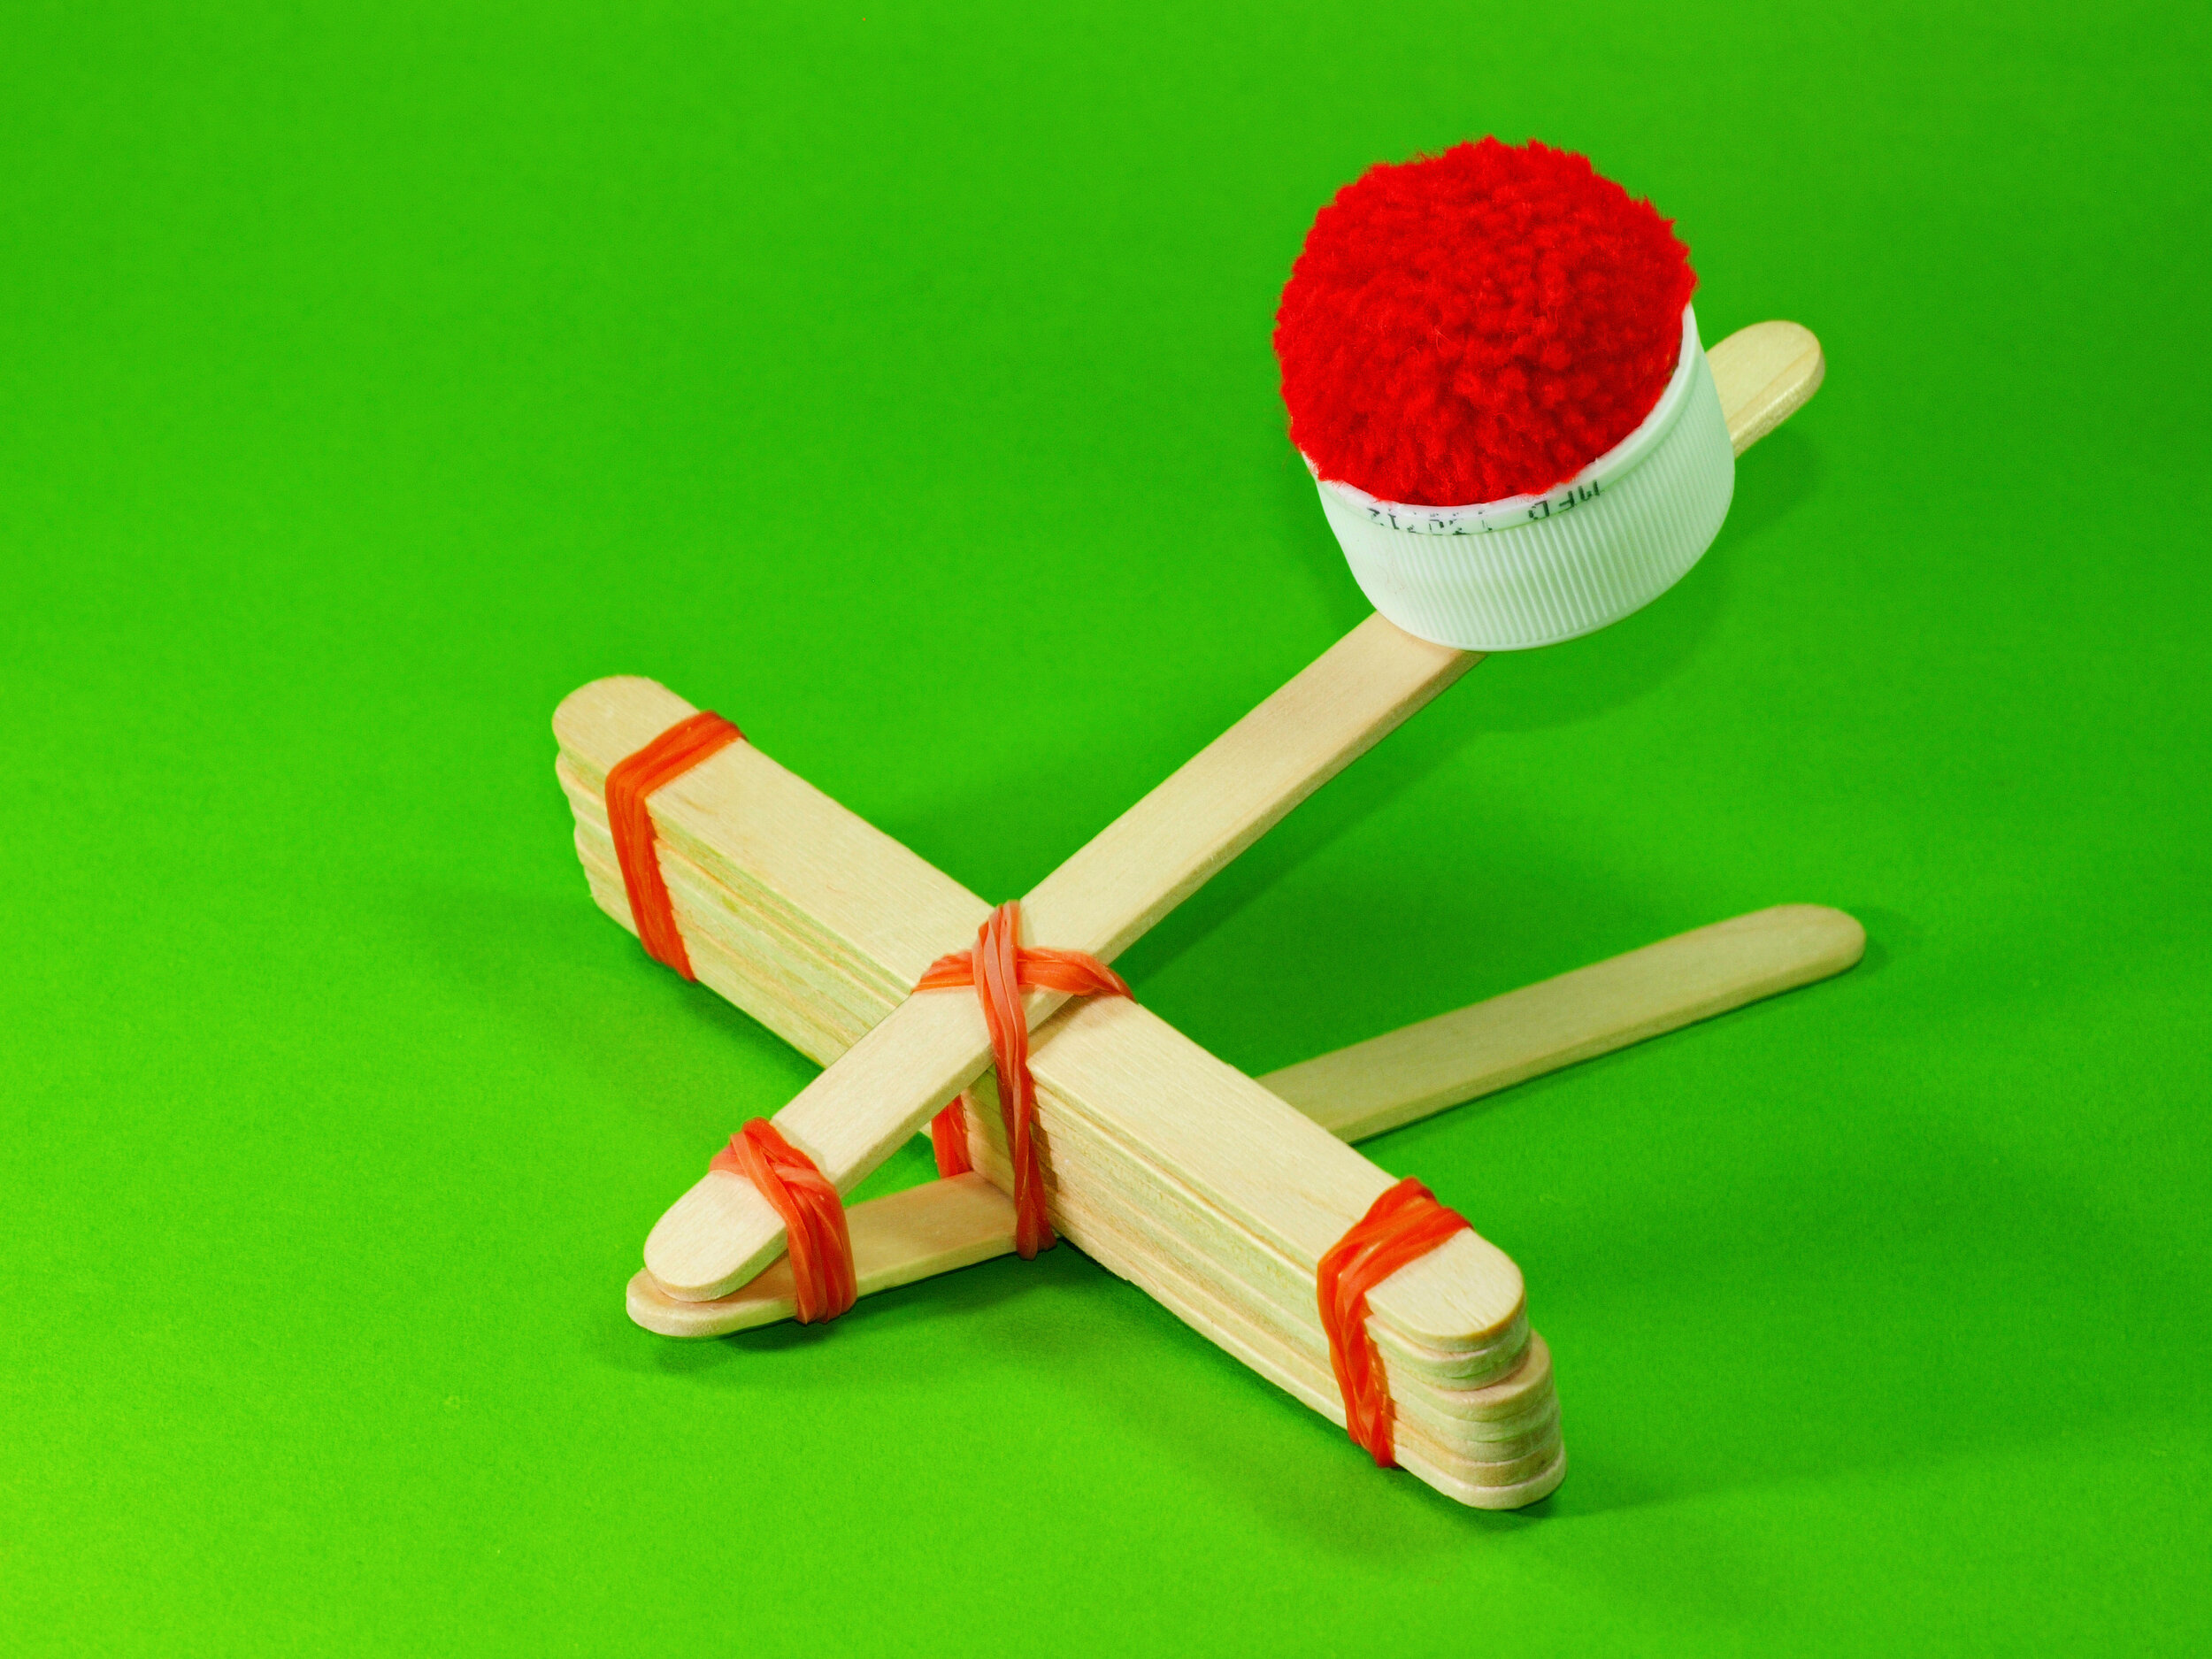 Catapult made out of popsicle sticks with red pom pom ready to be launched.